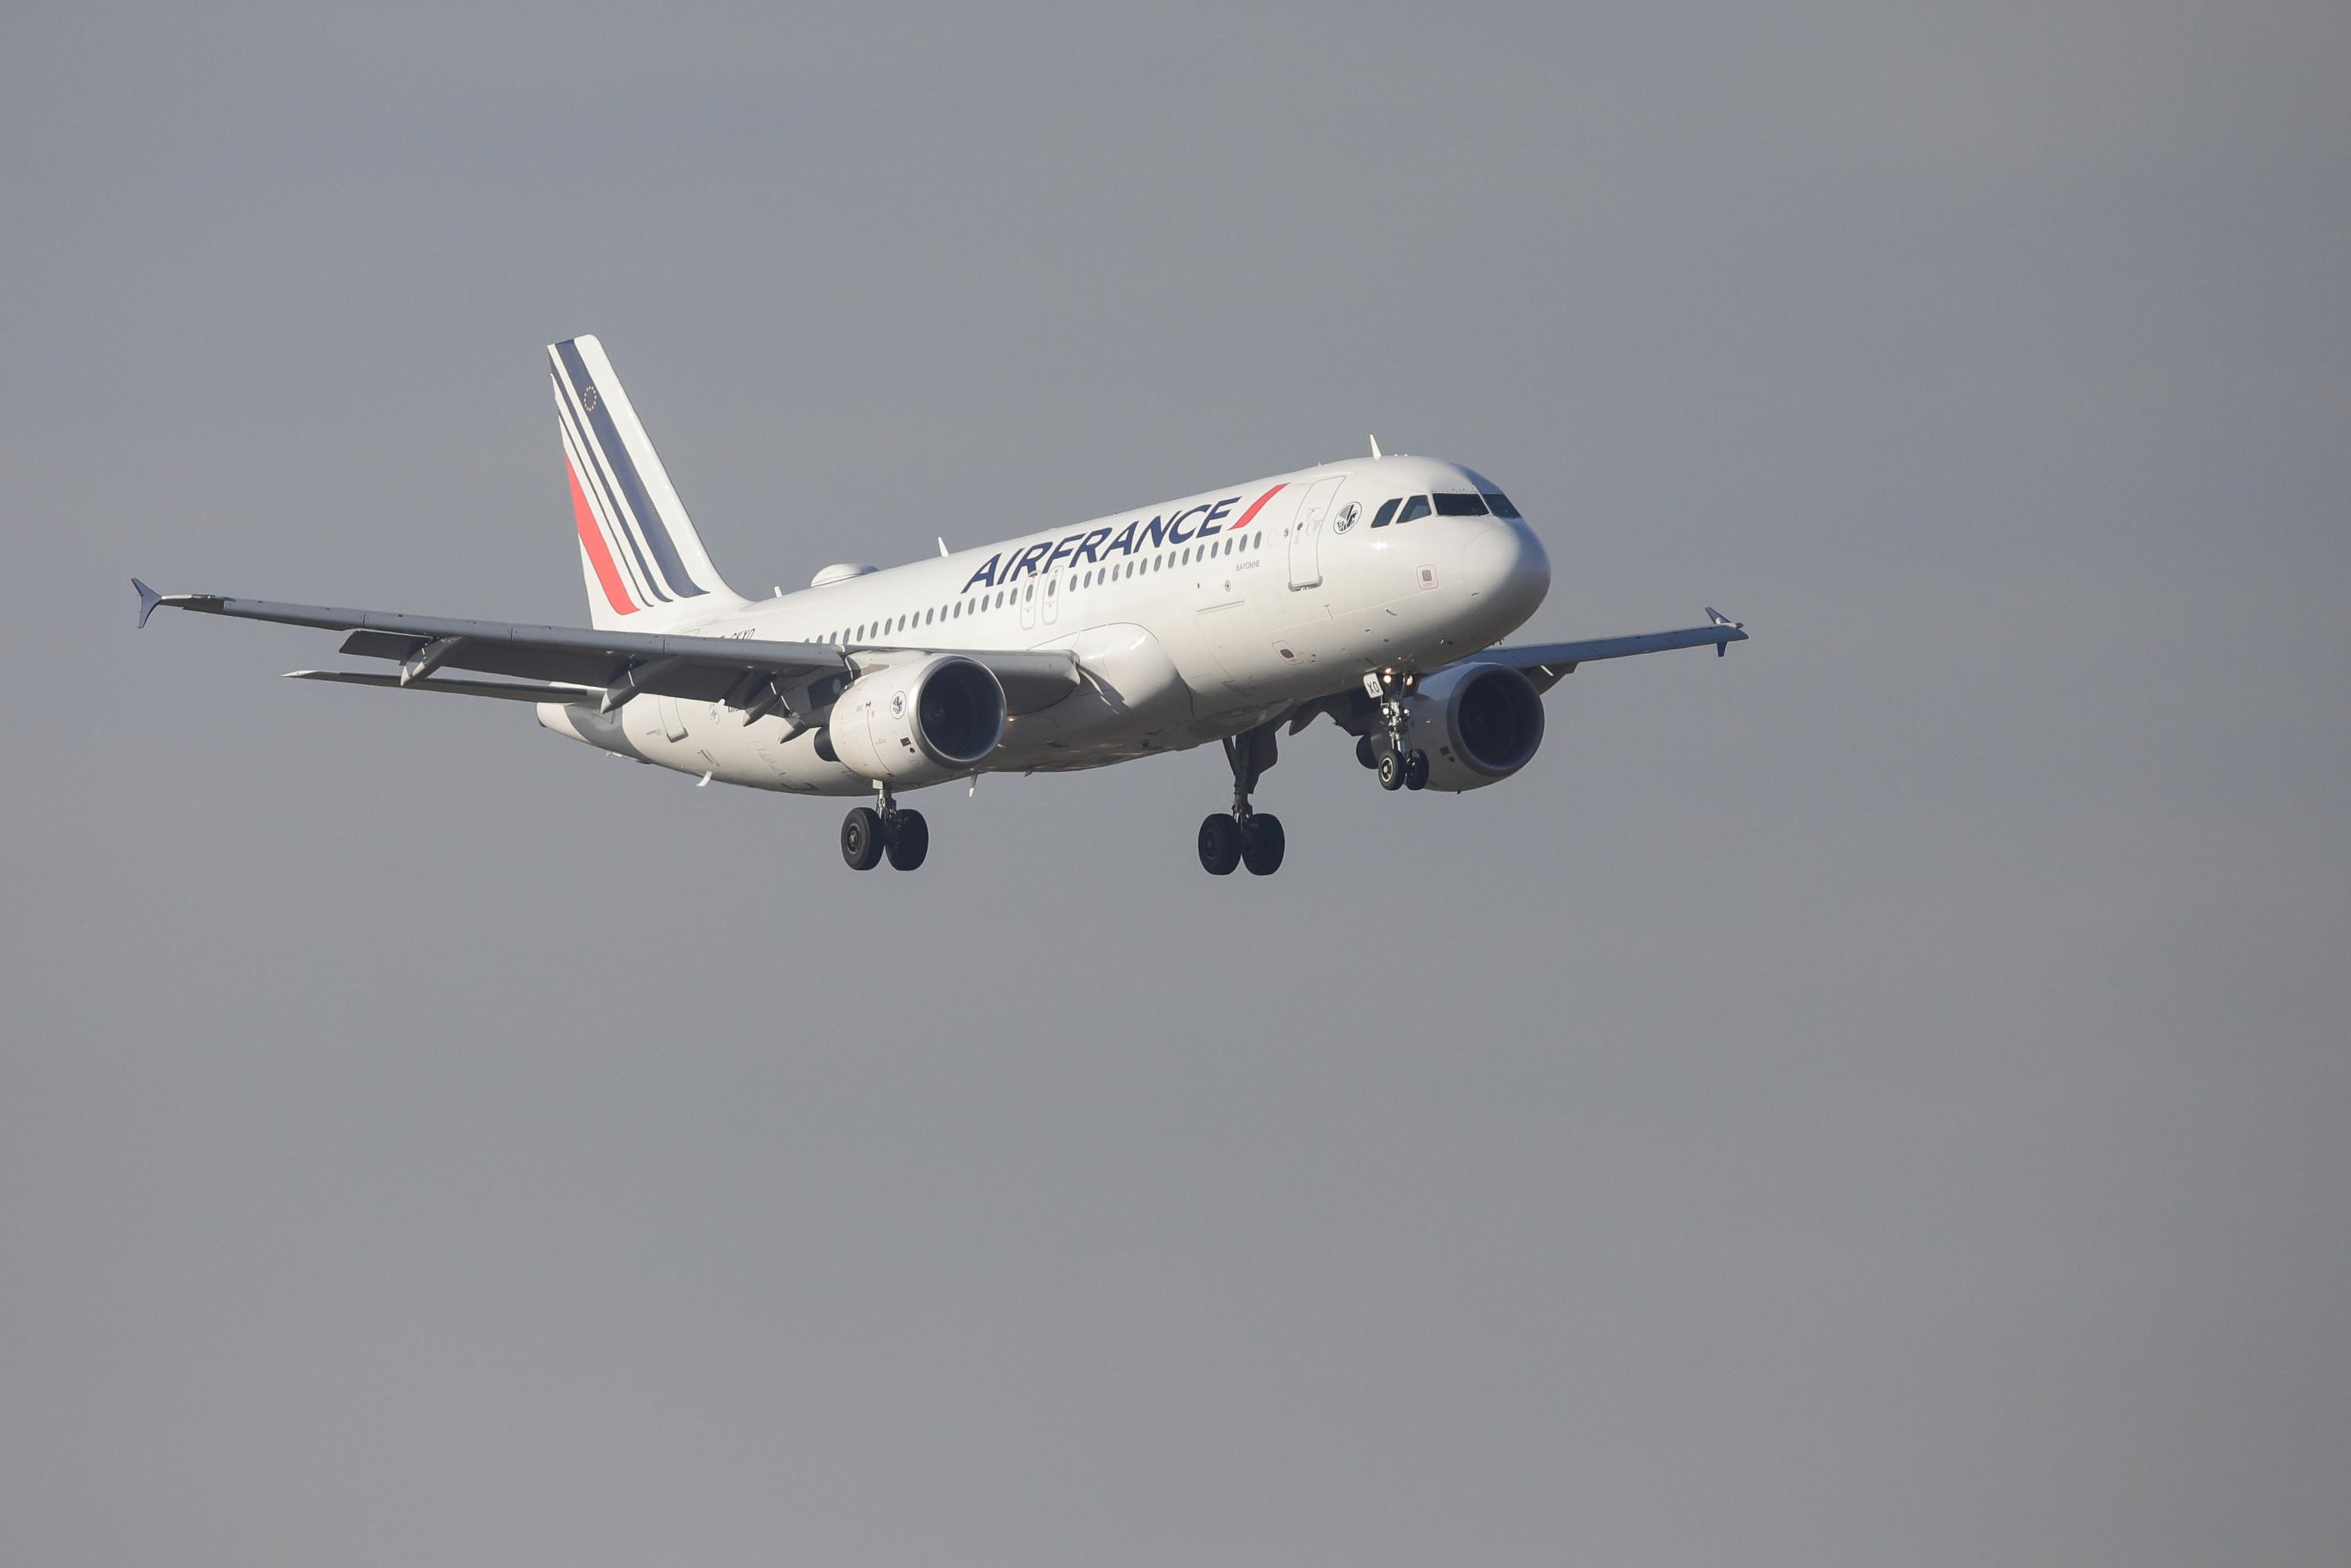 Air traffic in France reached its 2019 level in December, a first since the pandemic